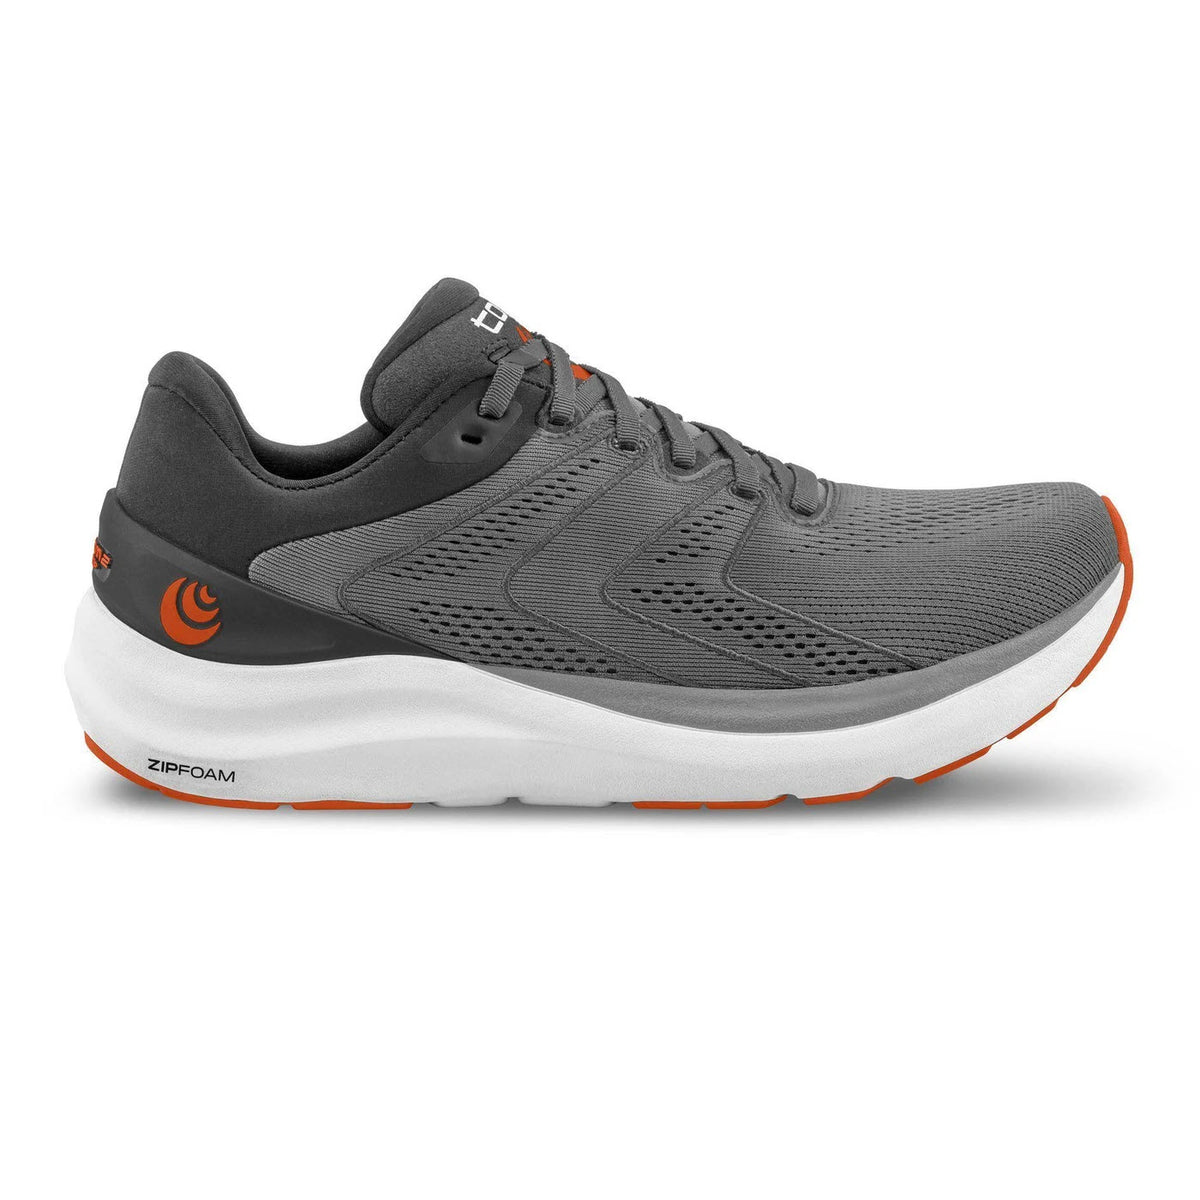 A single gray Topo Phantom 2 running shoe with orange accents and a white sole, designed as a daily training option featuring a wider toe-box.